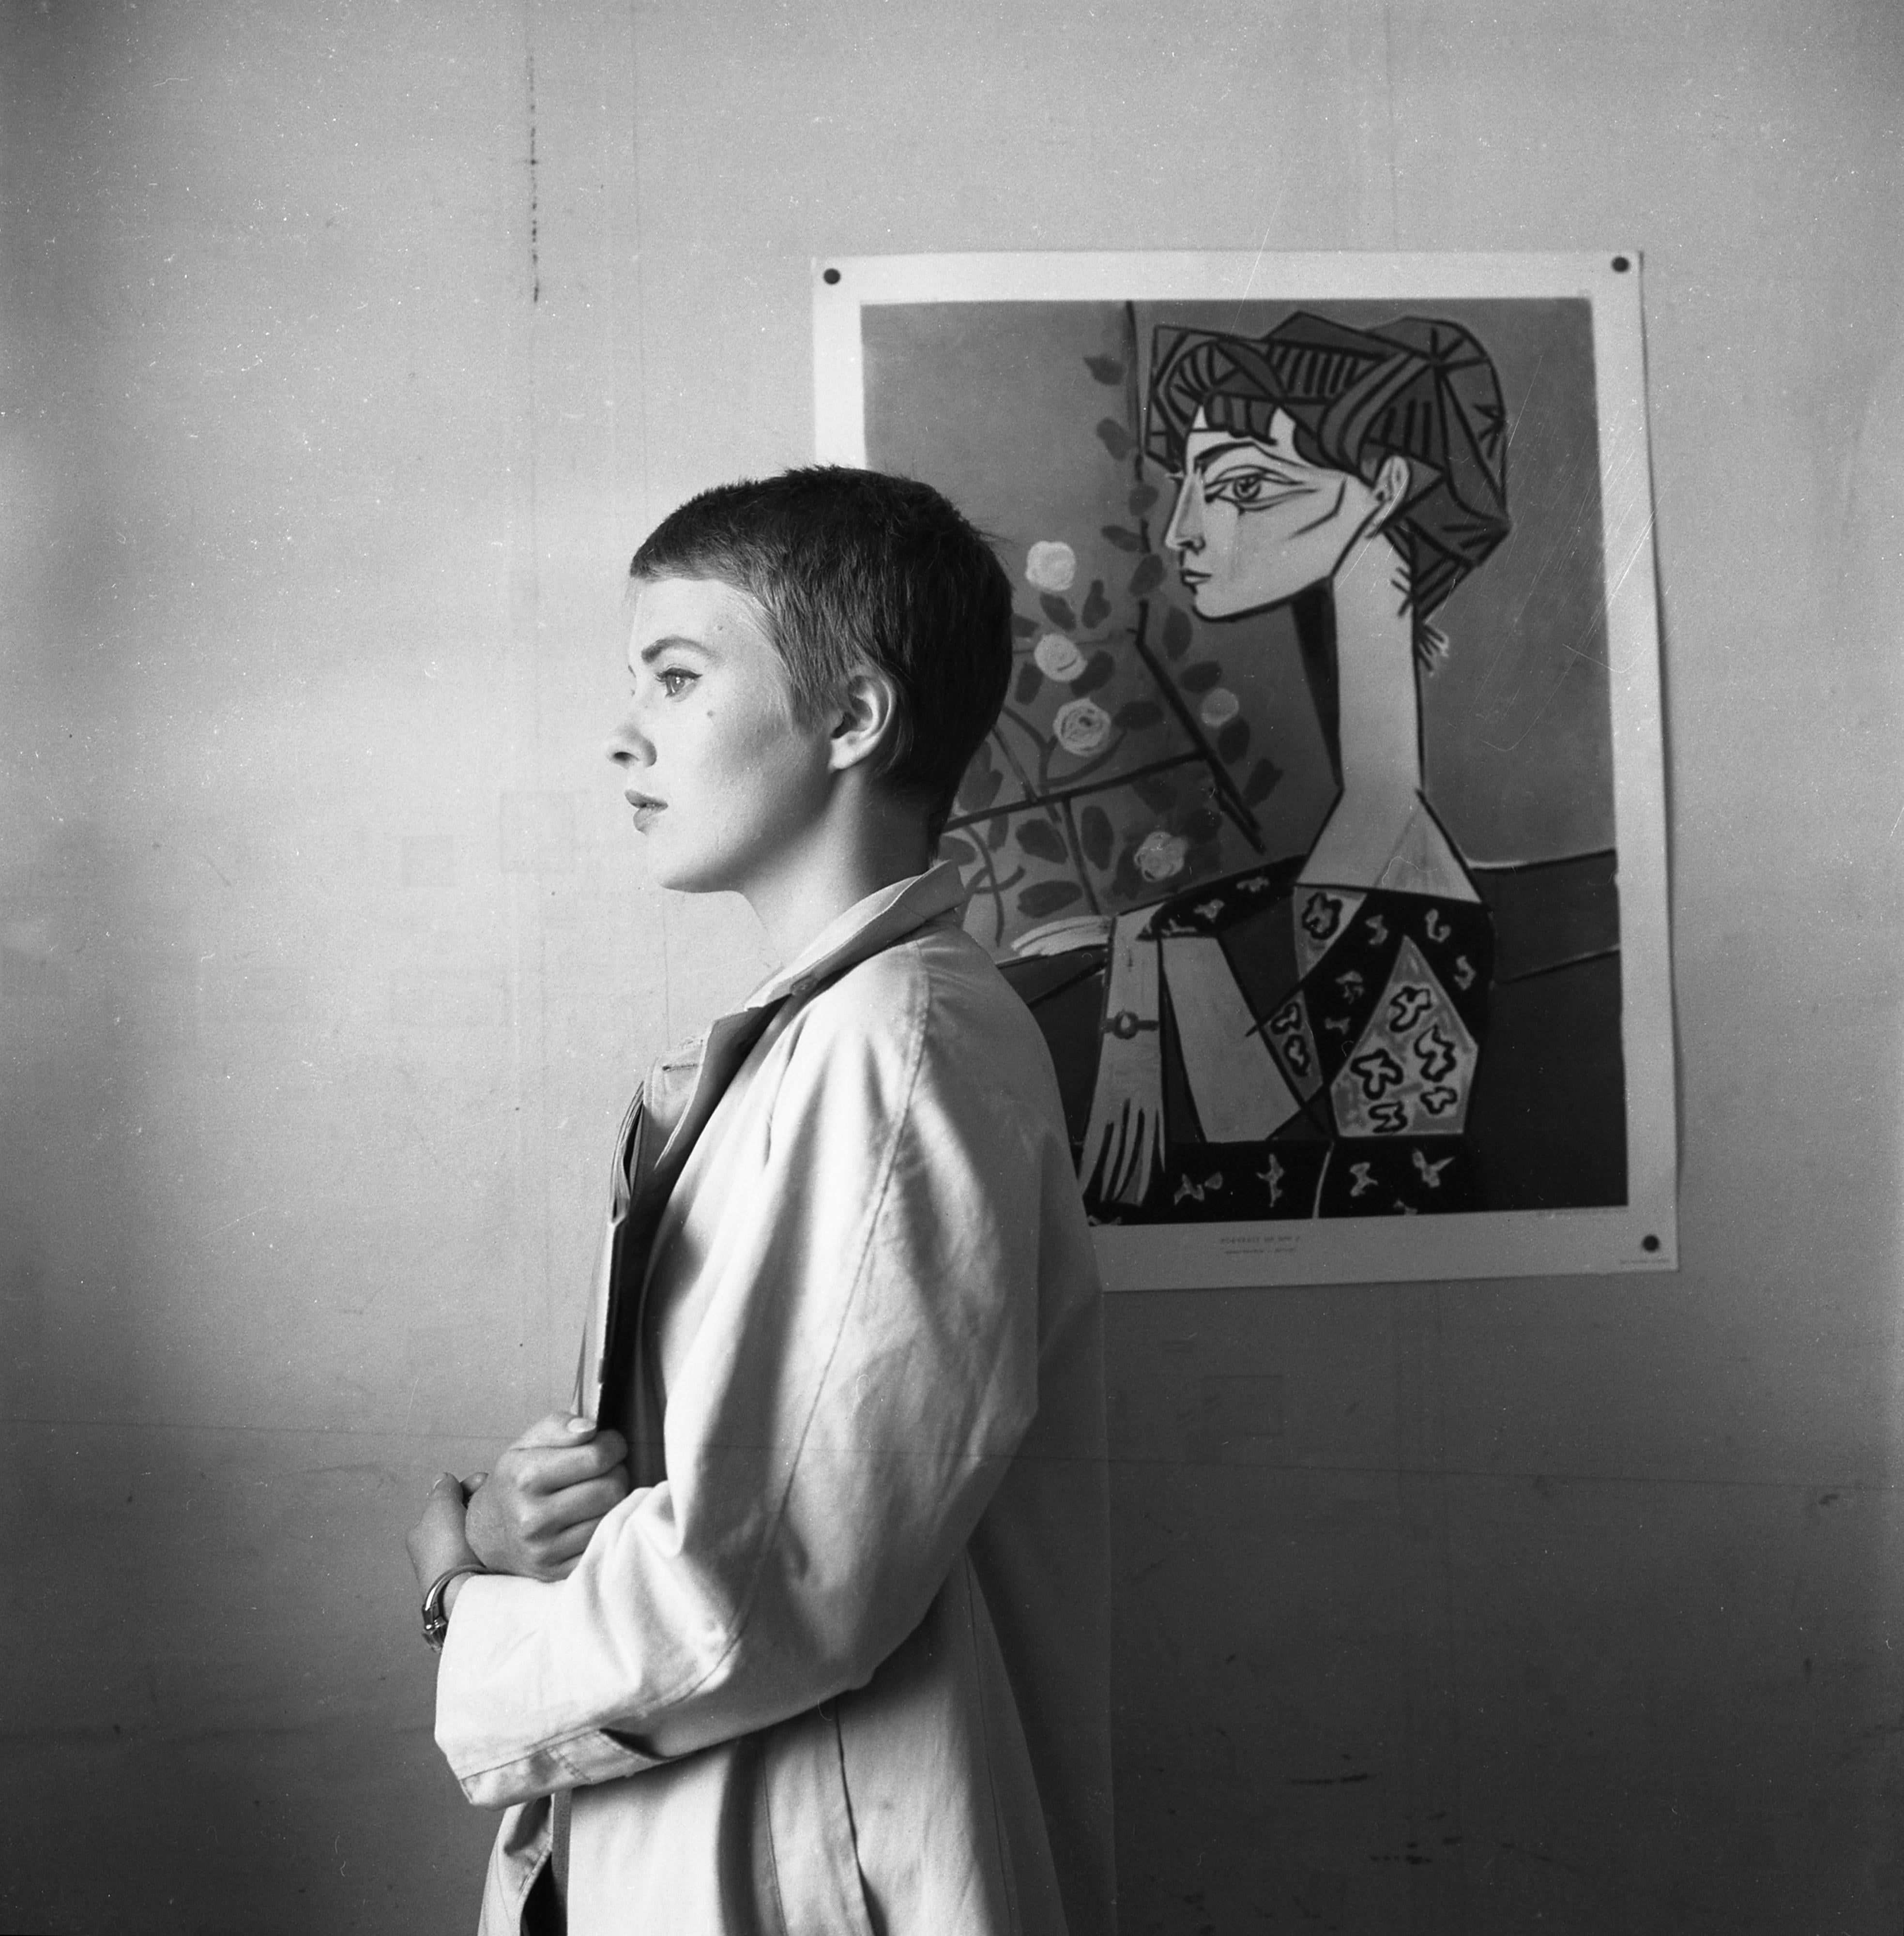 Seberg Profile by Picasso Painting - Photograph by Raymond Cauchetier